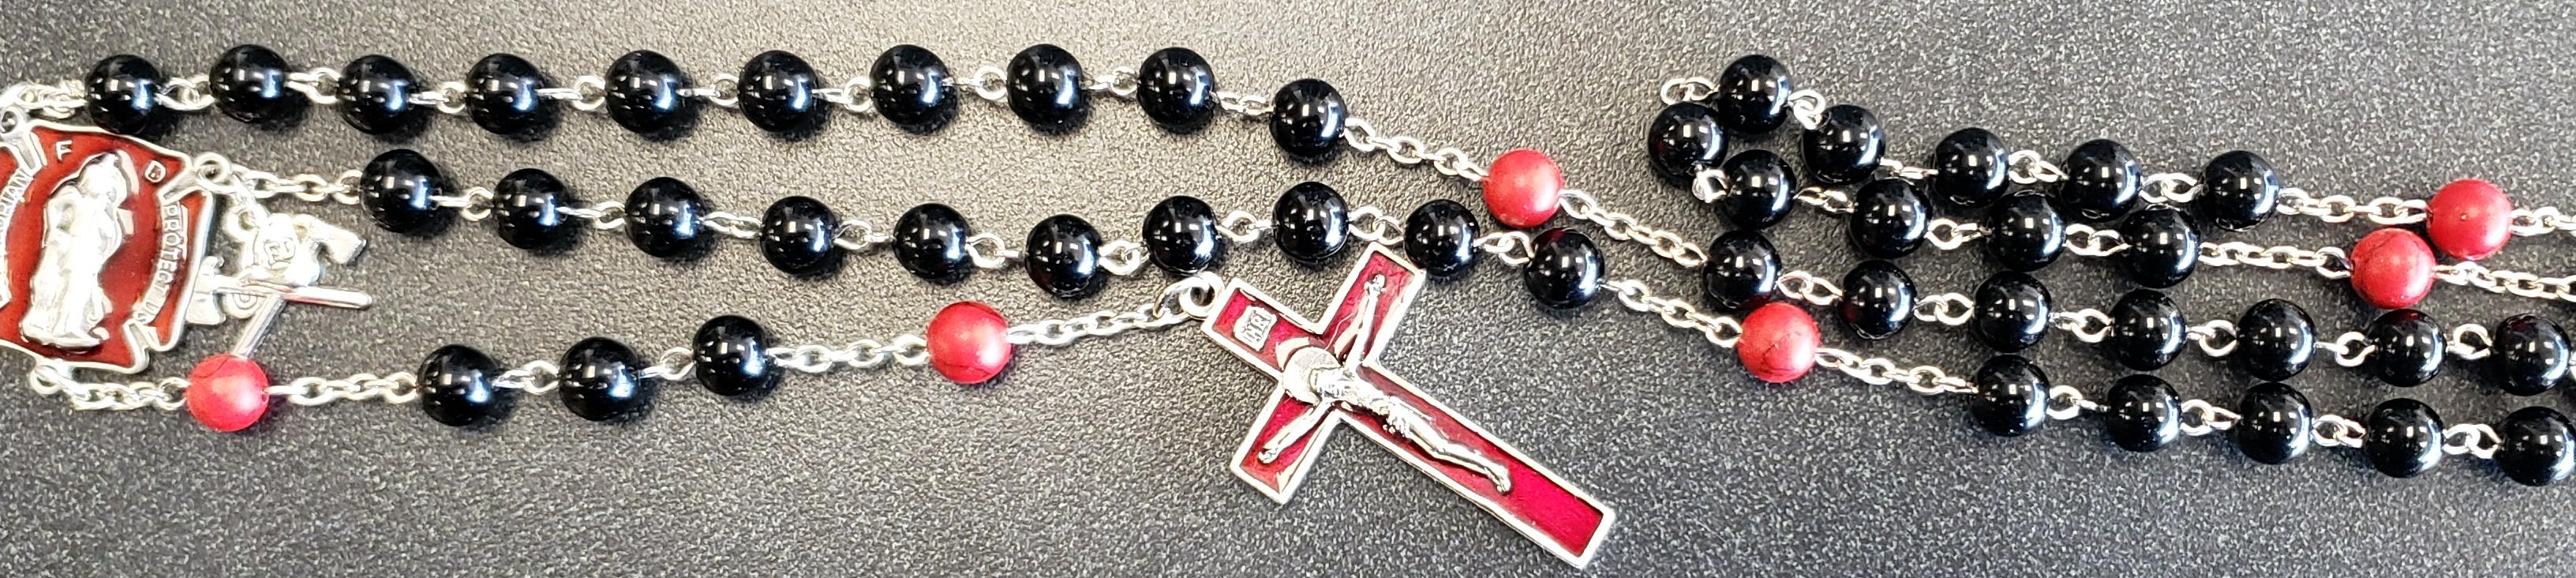 more info about rosary #53